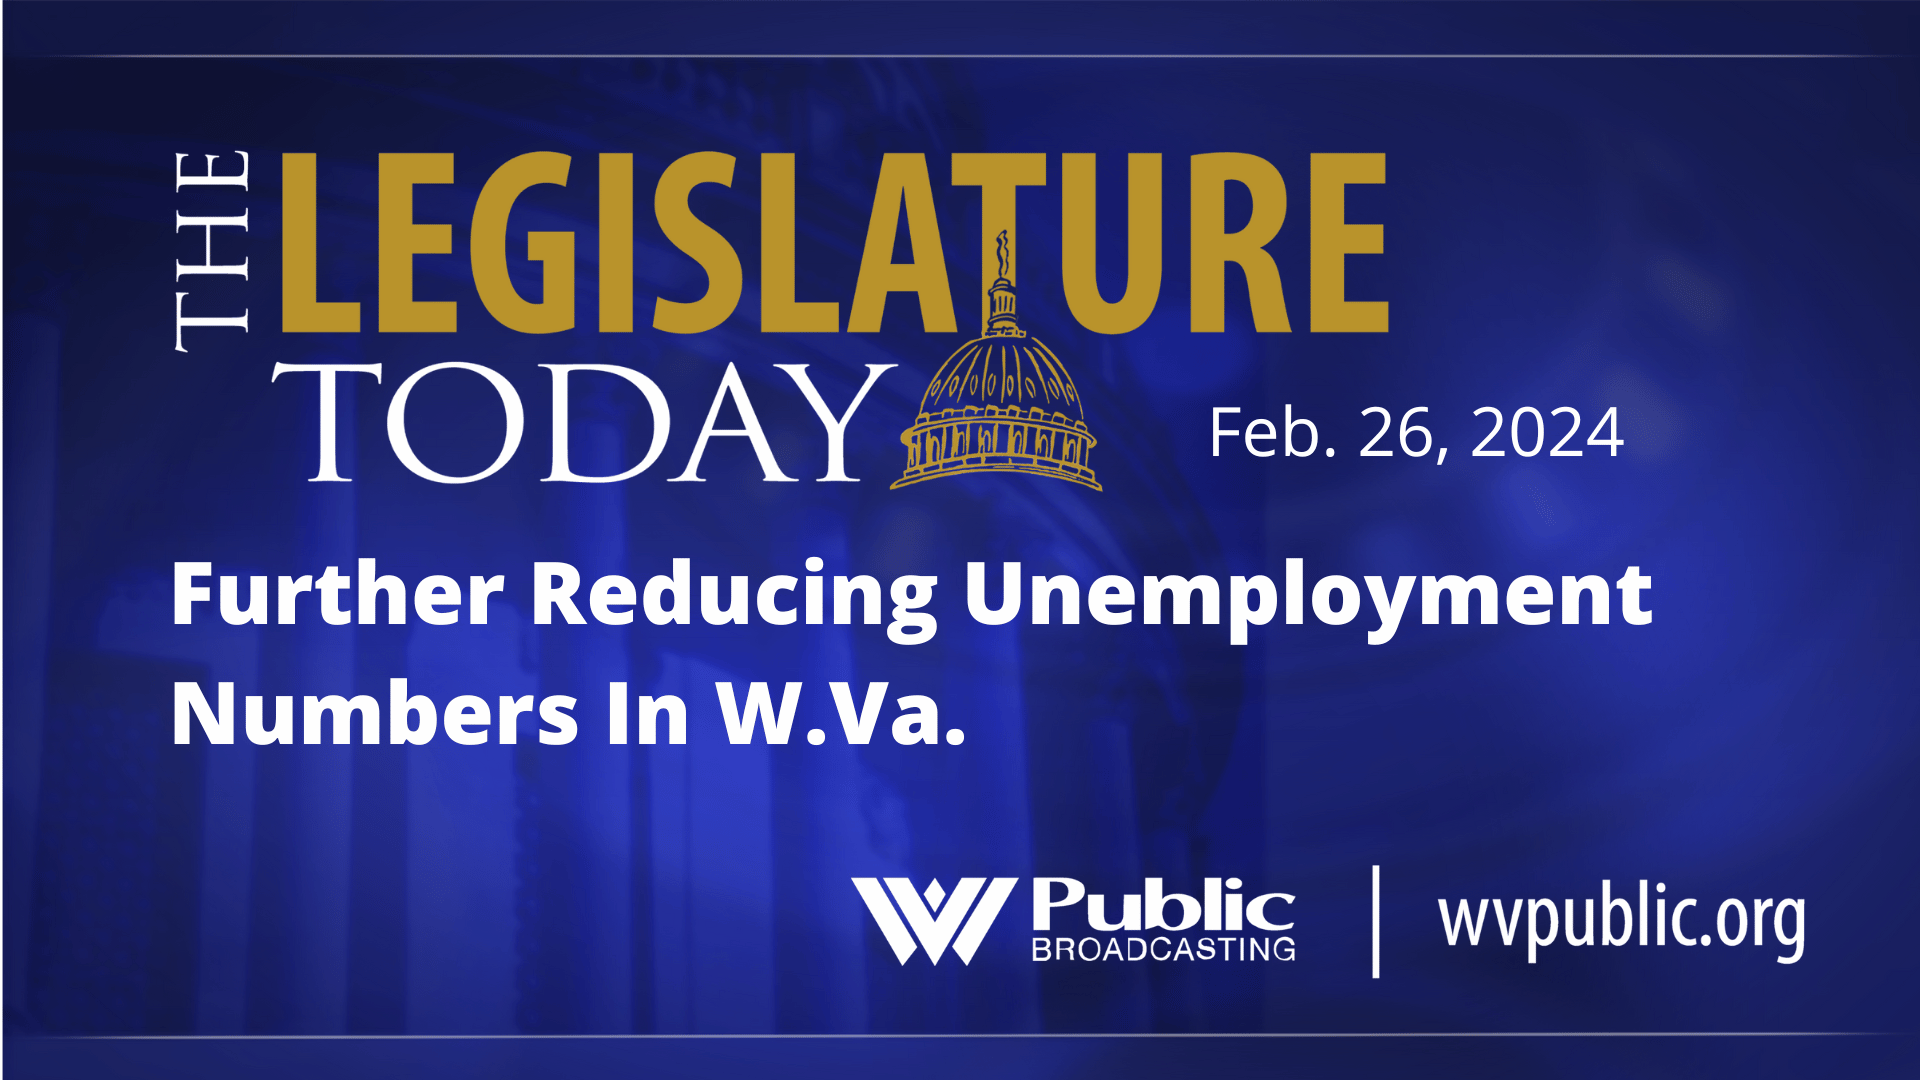 Further Reducing Unemployment Numbers In W.Va.